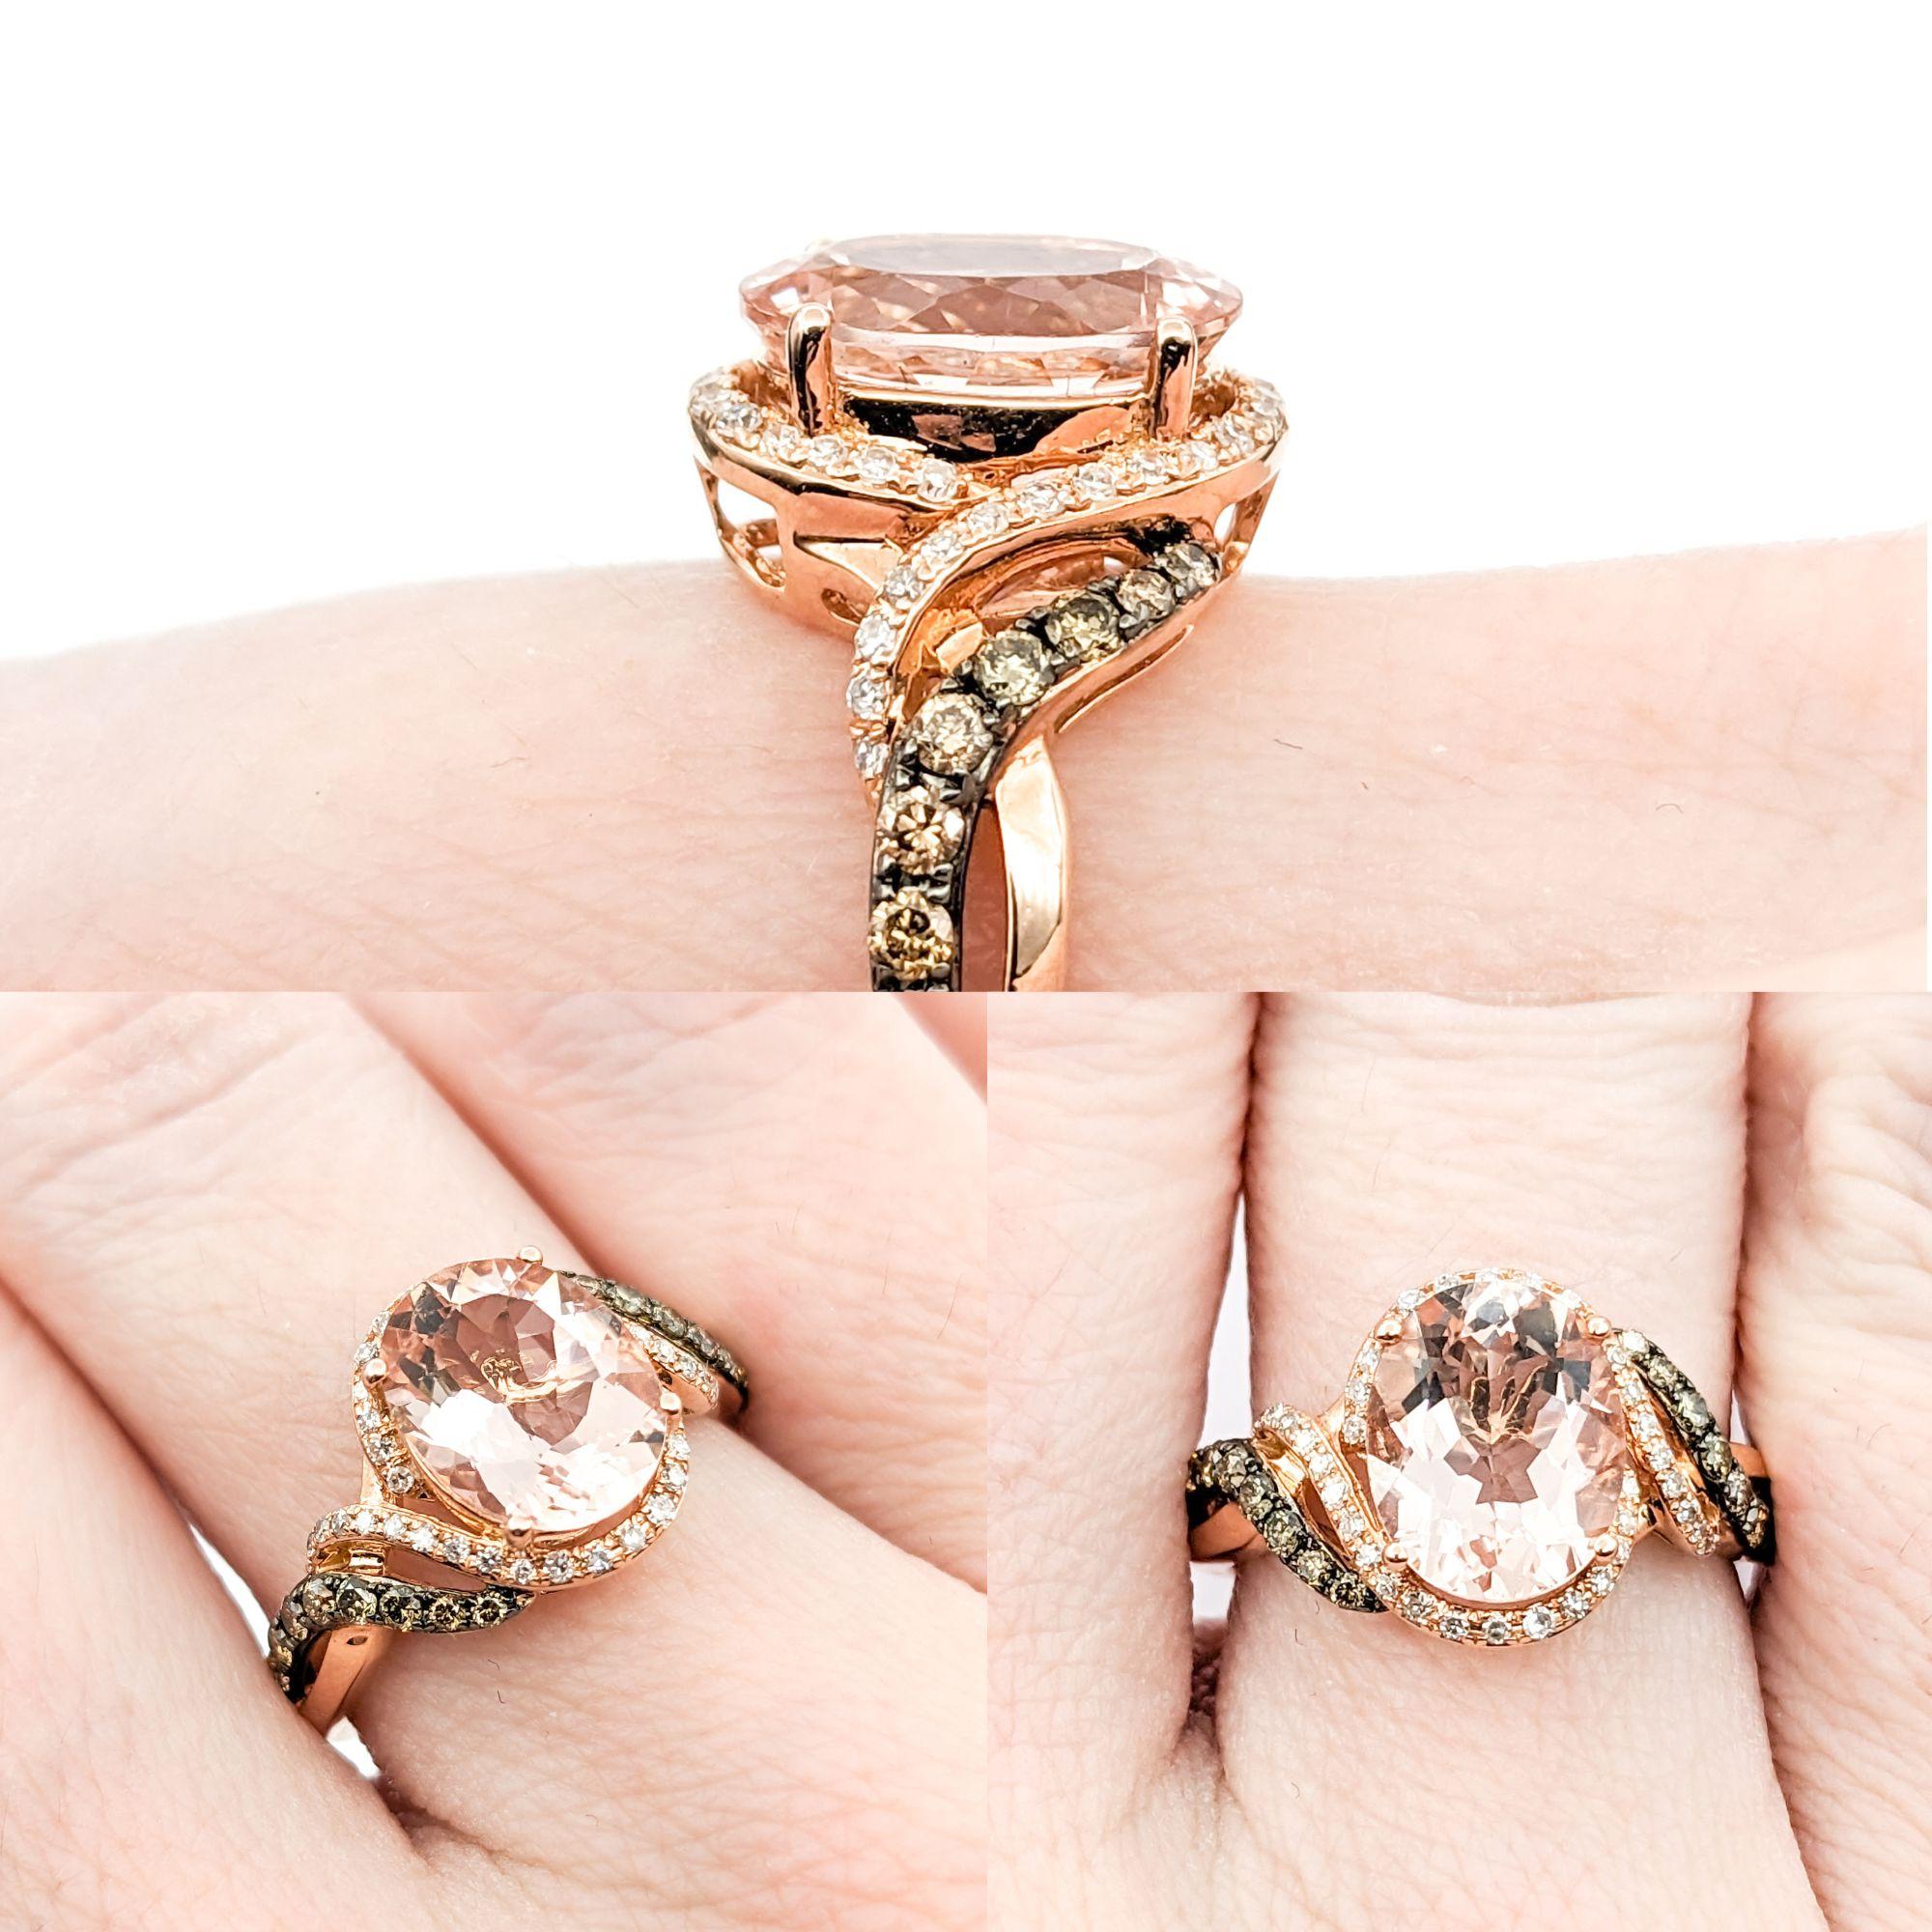 2.35ct Morganite & Diamonds Ring In Rose Gold


Crafted in 14kt rose gold, this exquisite Gemstone Fashion Ring showcases a stunning 2.35ct morganite centerpiece surrounded by 0.36ctw of round diamonds. These diamonds boast an I clarity rating,